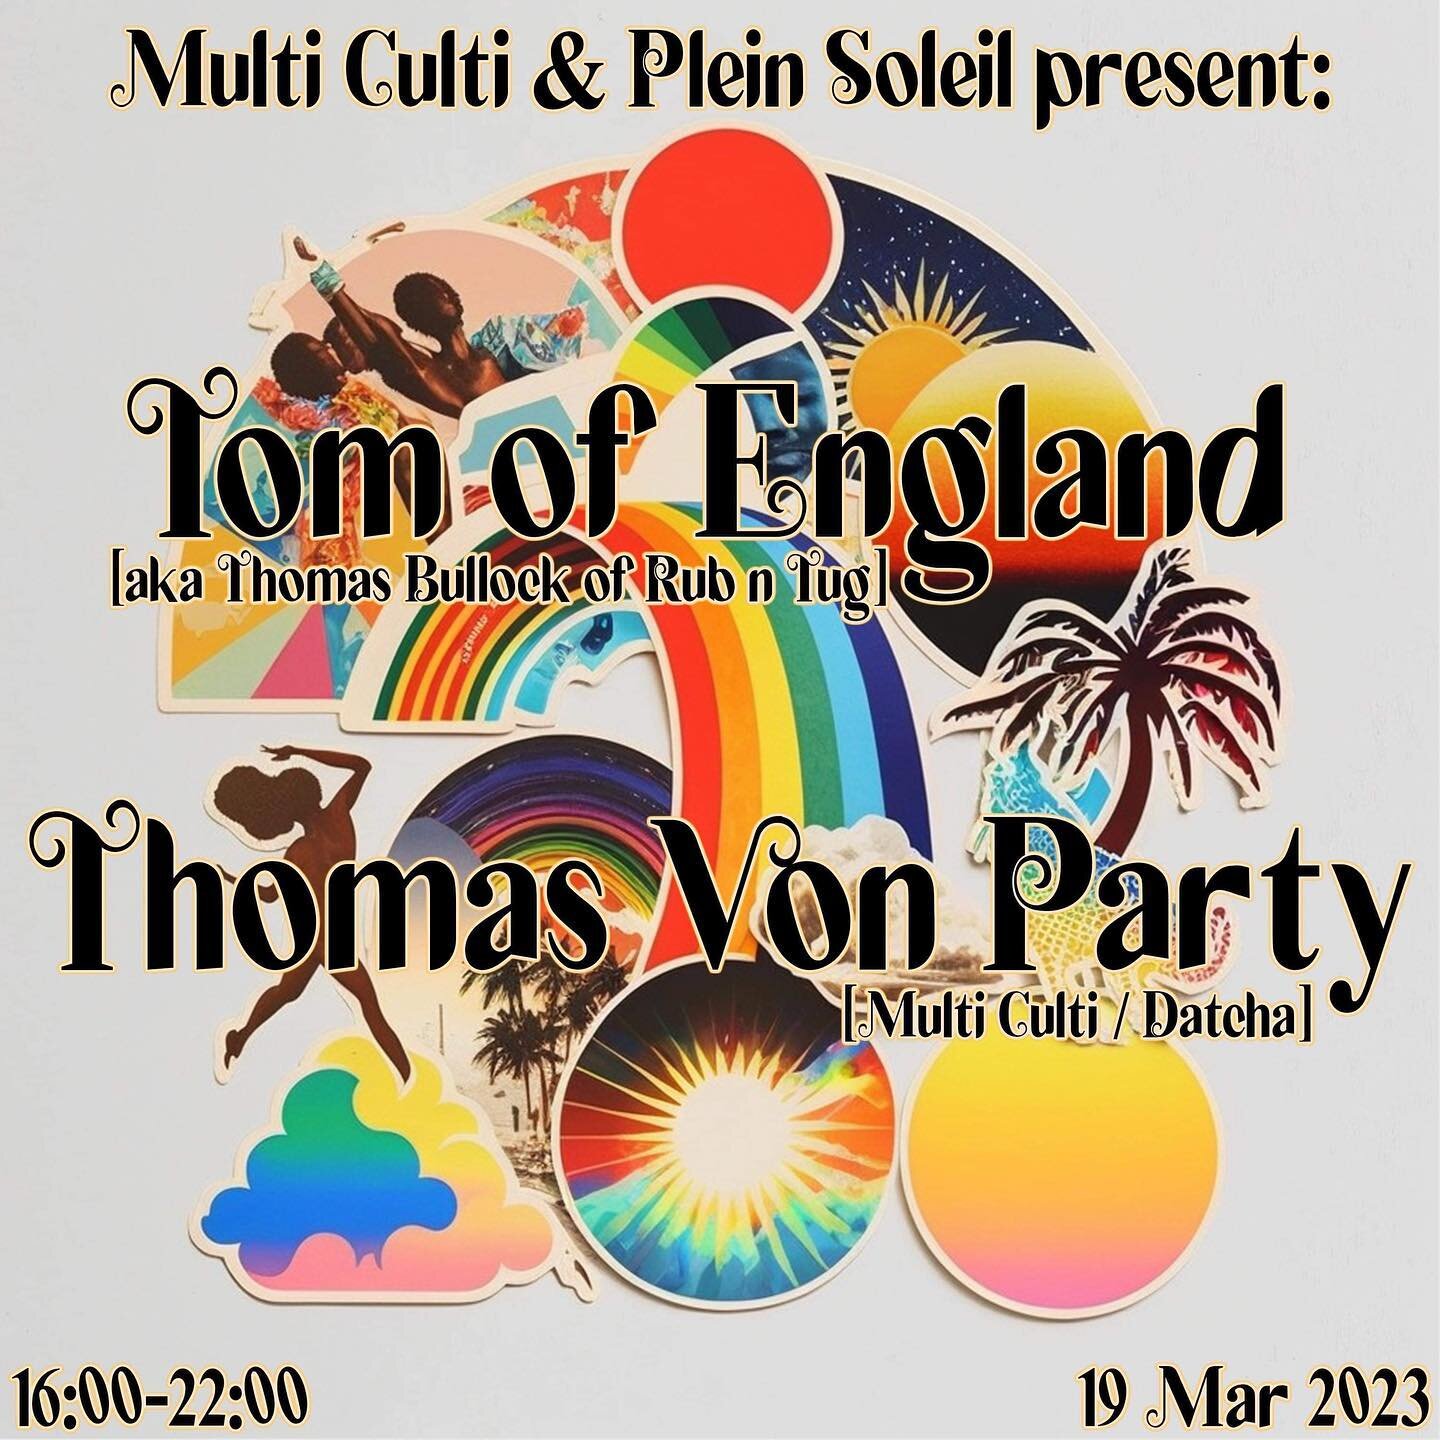 It&rsquo;s Sunday! And we have a surprise for you 🥳
I&rsquo;m really excited to have @vonparty hosting his first @multicultifamily gathering in the new space we co-creating!
We&rsquo;ll have @tomofenglandland playin, I heard him play last night and 